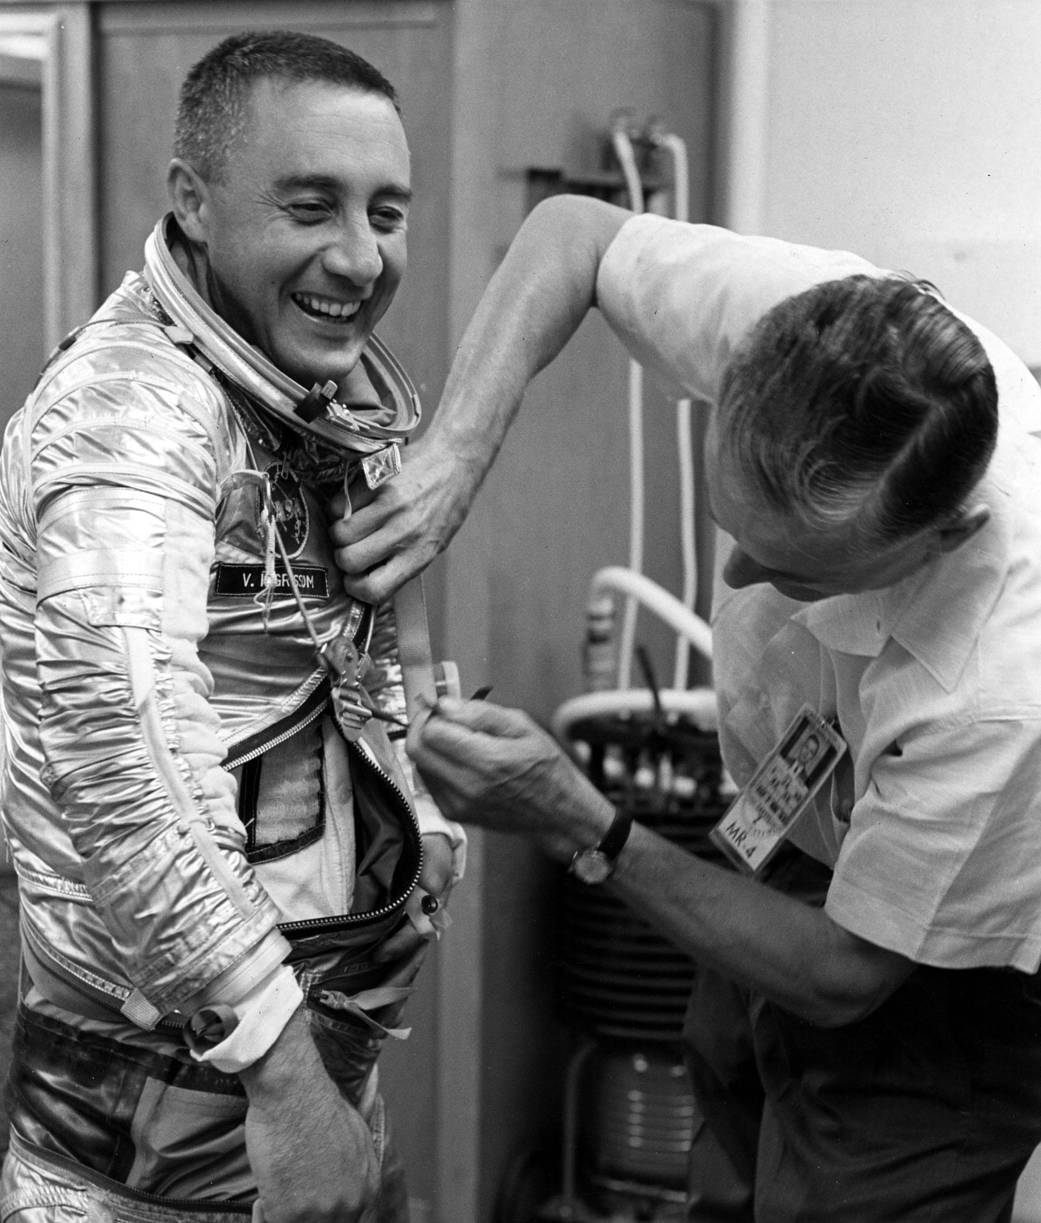 Gus Grissom Suits Up for Launch